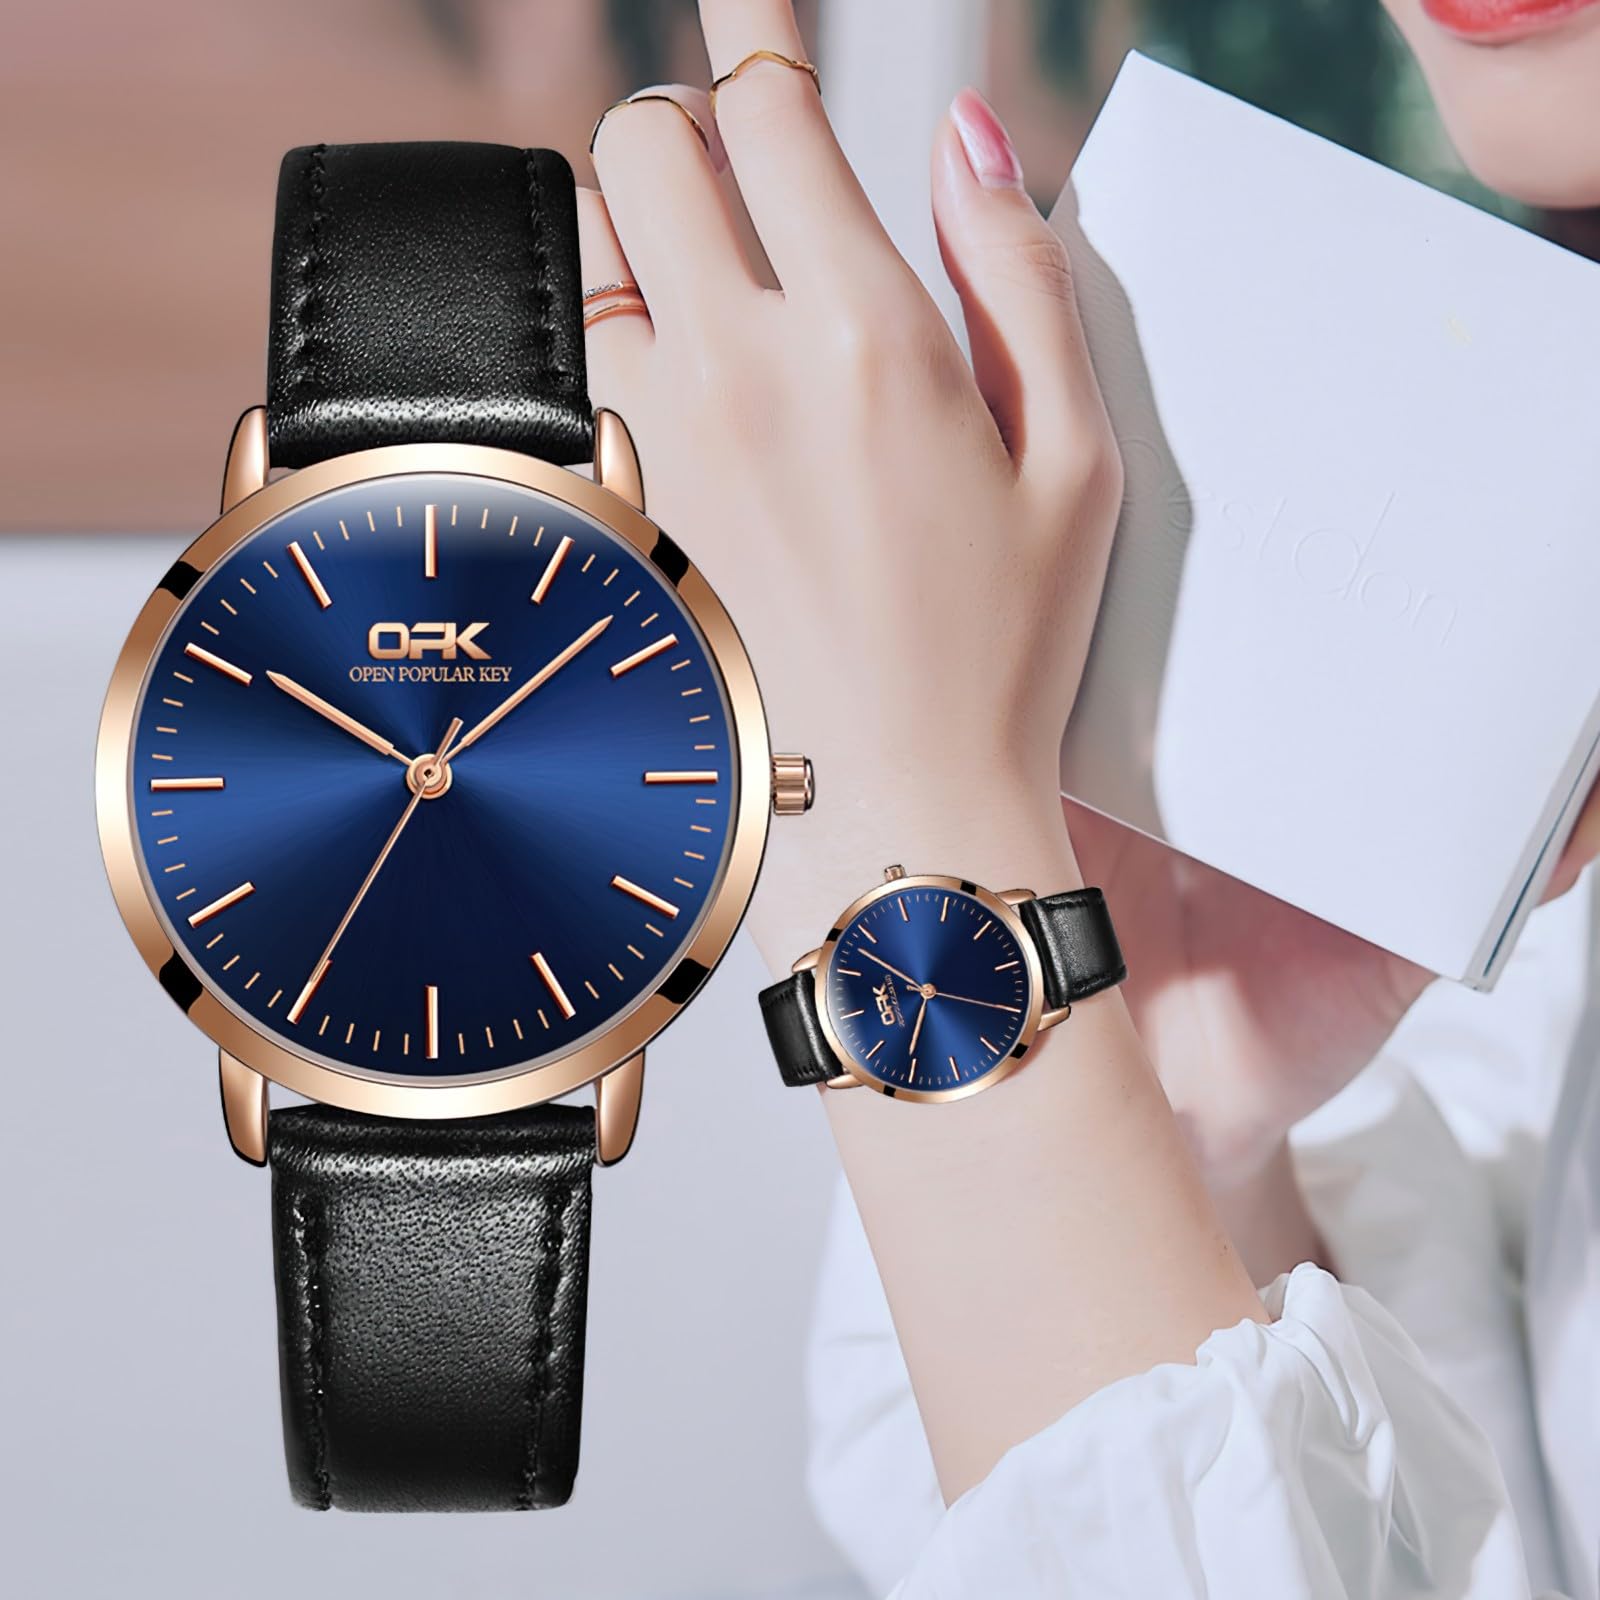 TPSOUM Wrist Watch for Women, Business Style Quartz Analog Women's Watch with Stainless Steel Strap